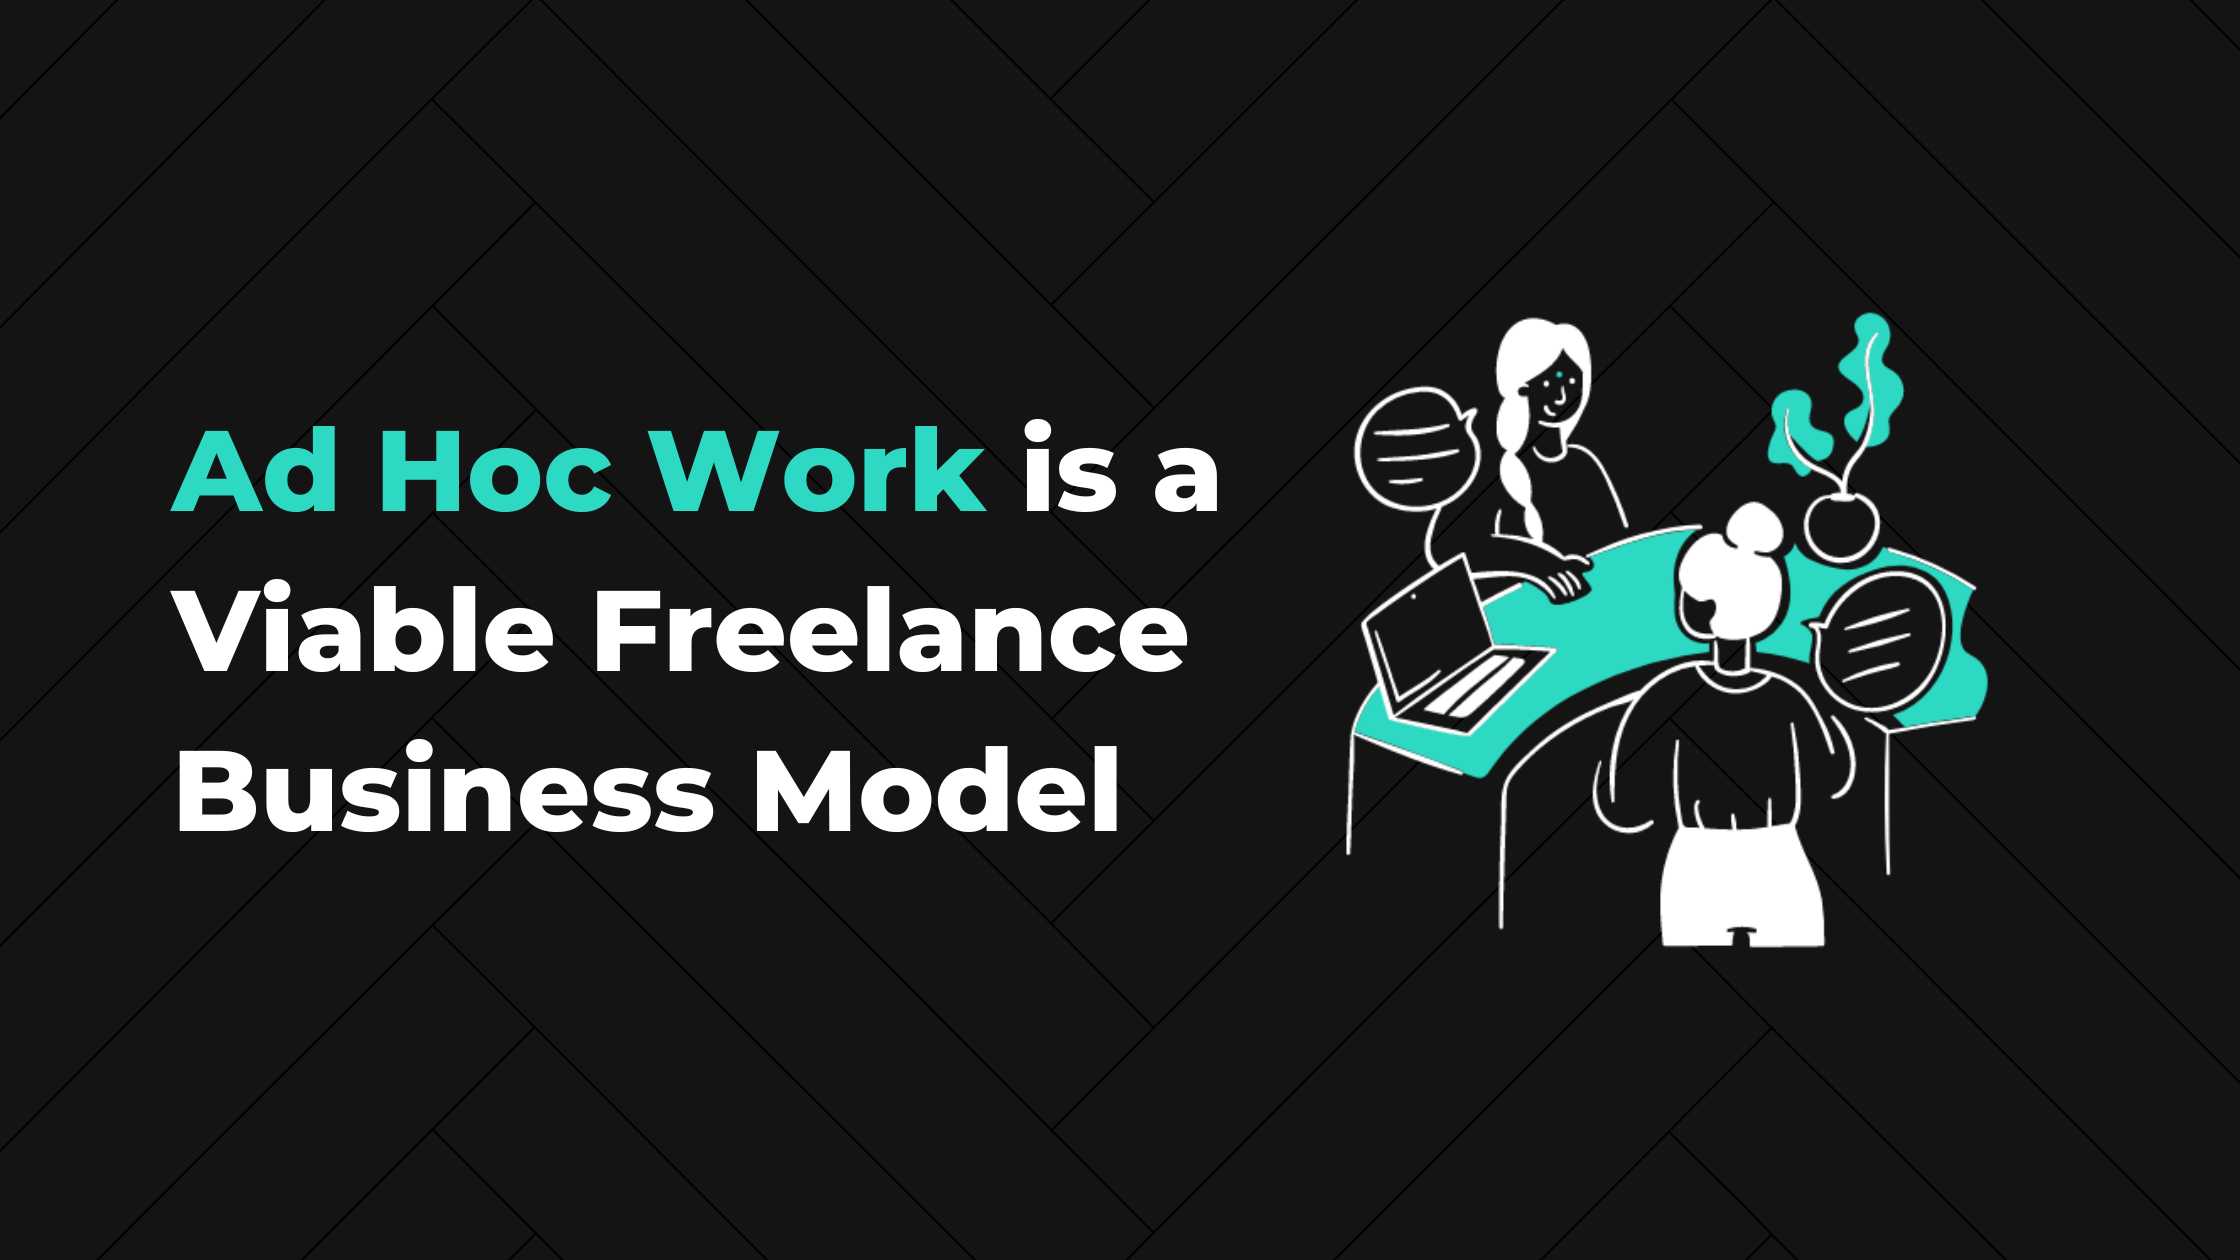 Ad Hoc Work is a Viable Freelance Business Model 